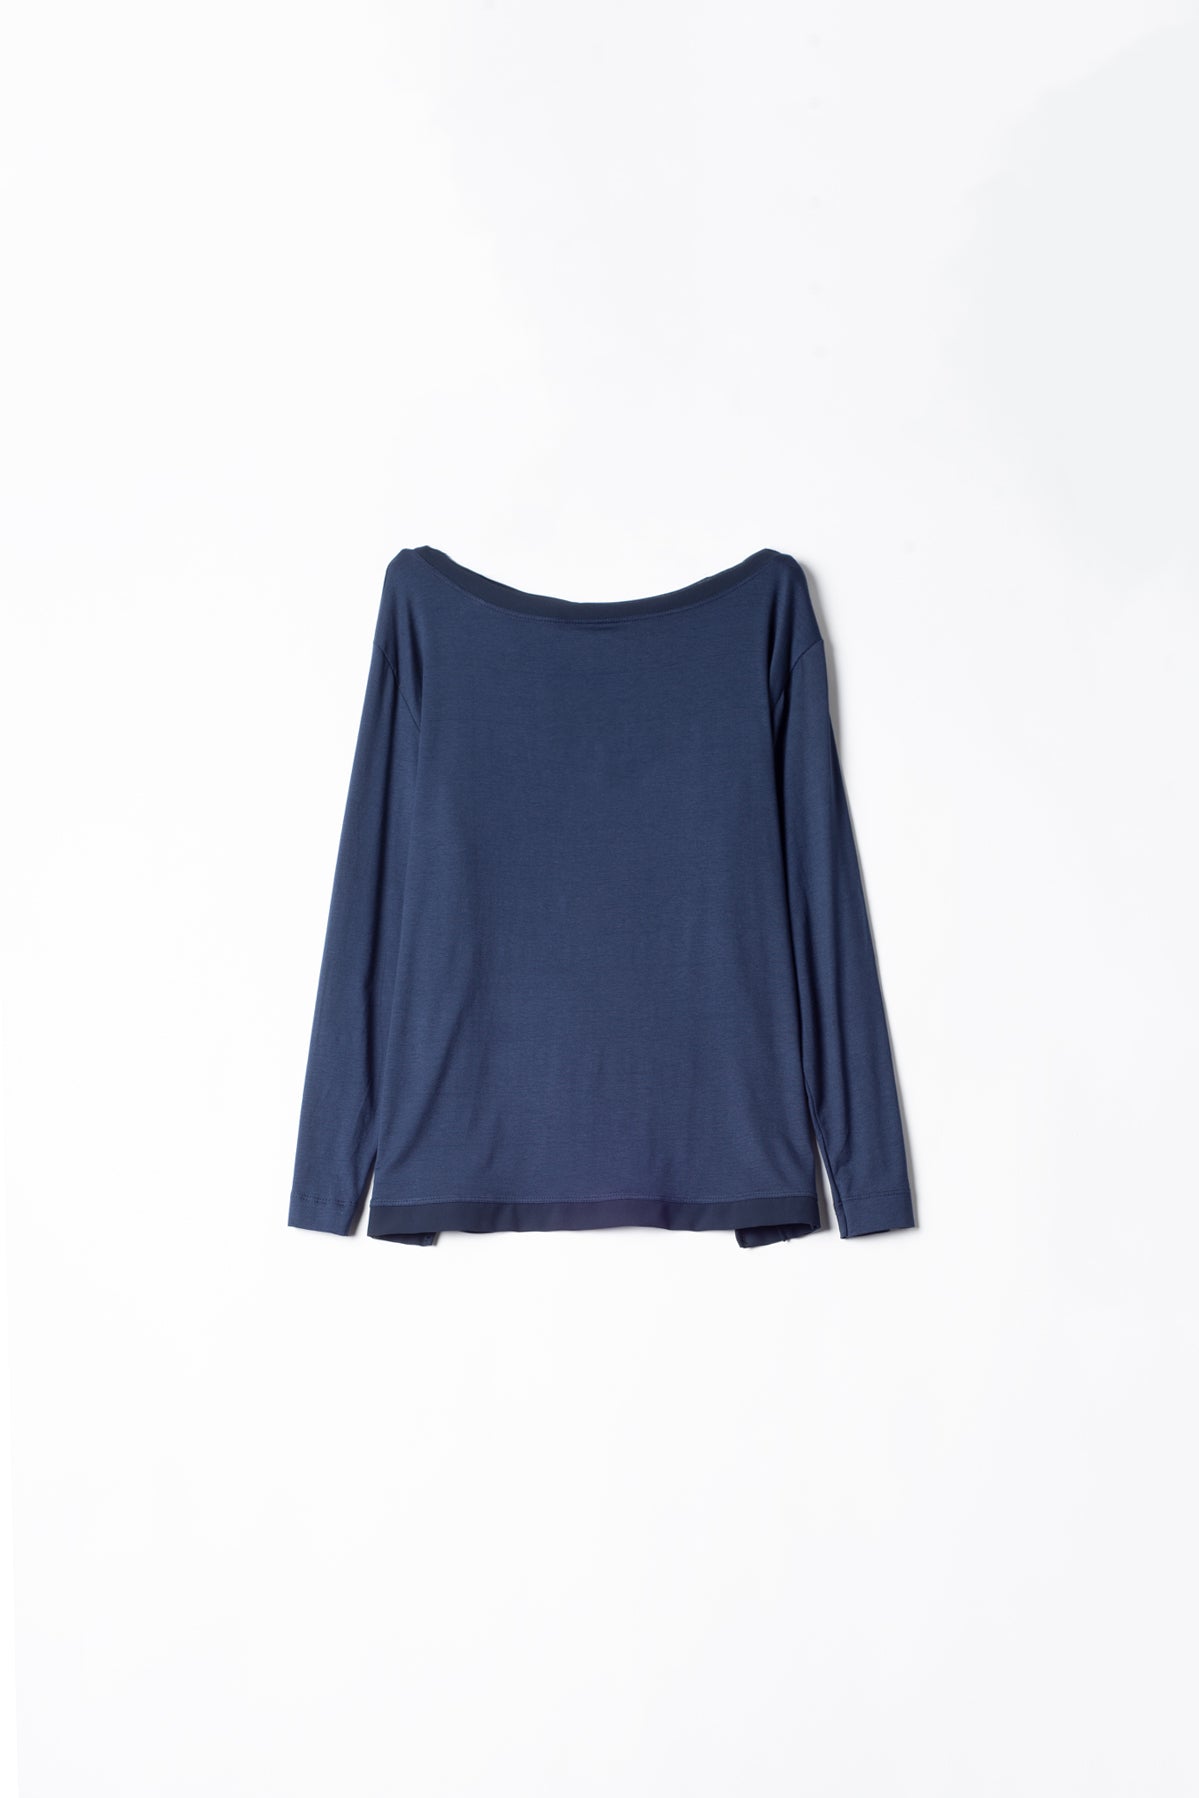 Viscose fabric top with boat neckline and side slits